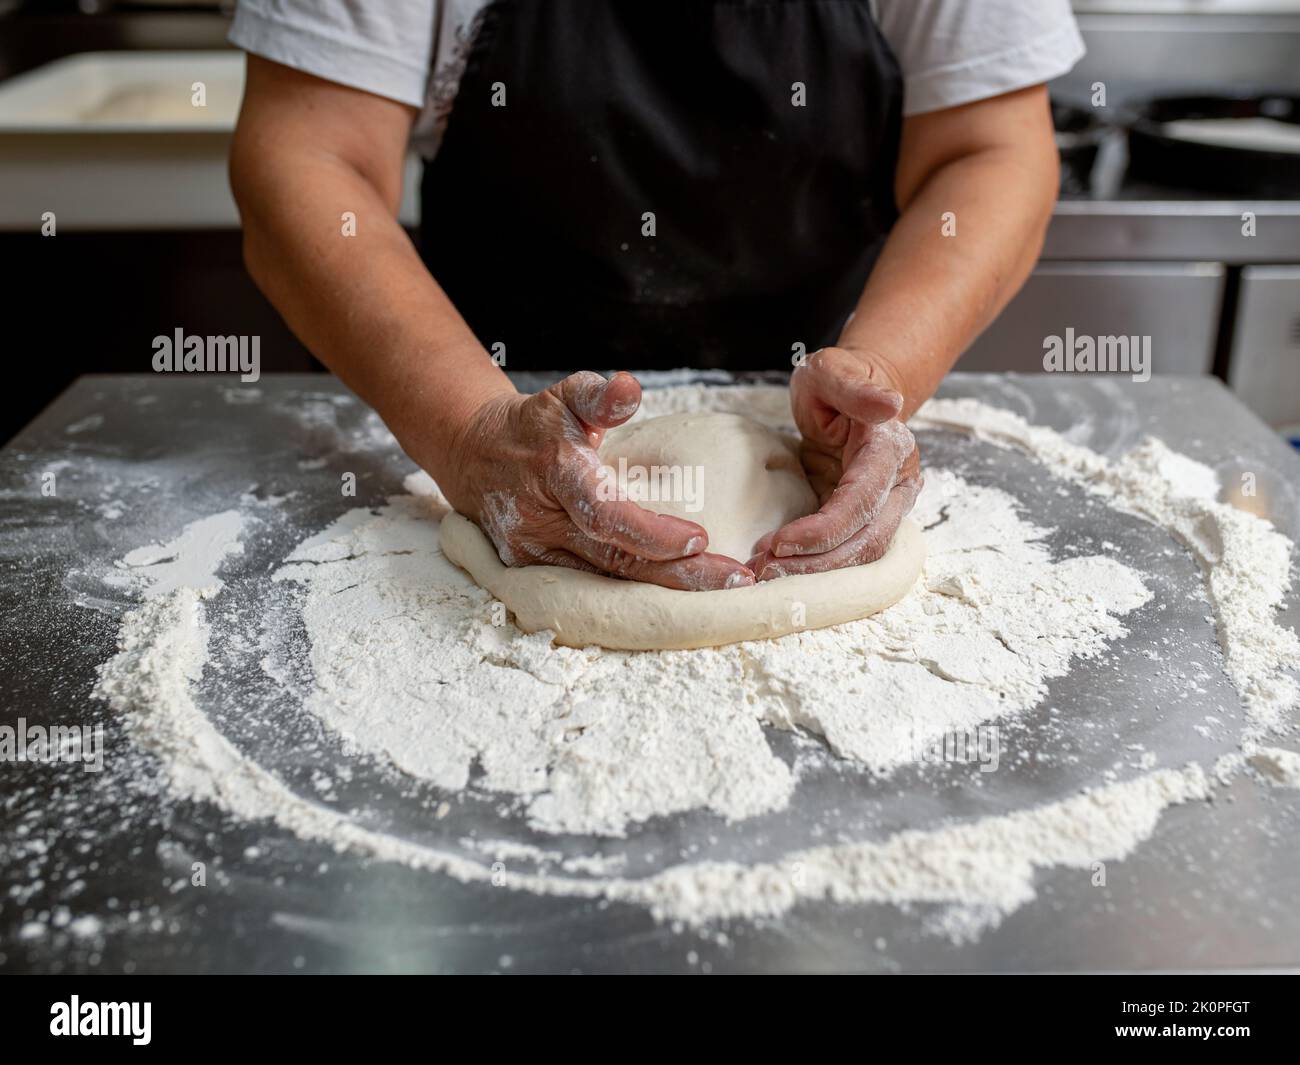 Woman making pizza dough on stainless steel counter Stock Photo